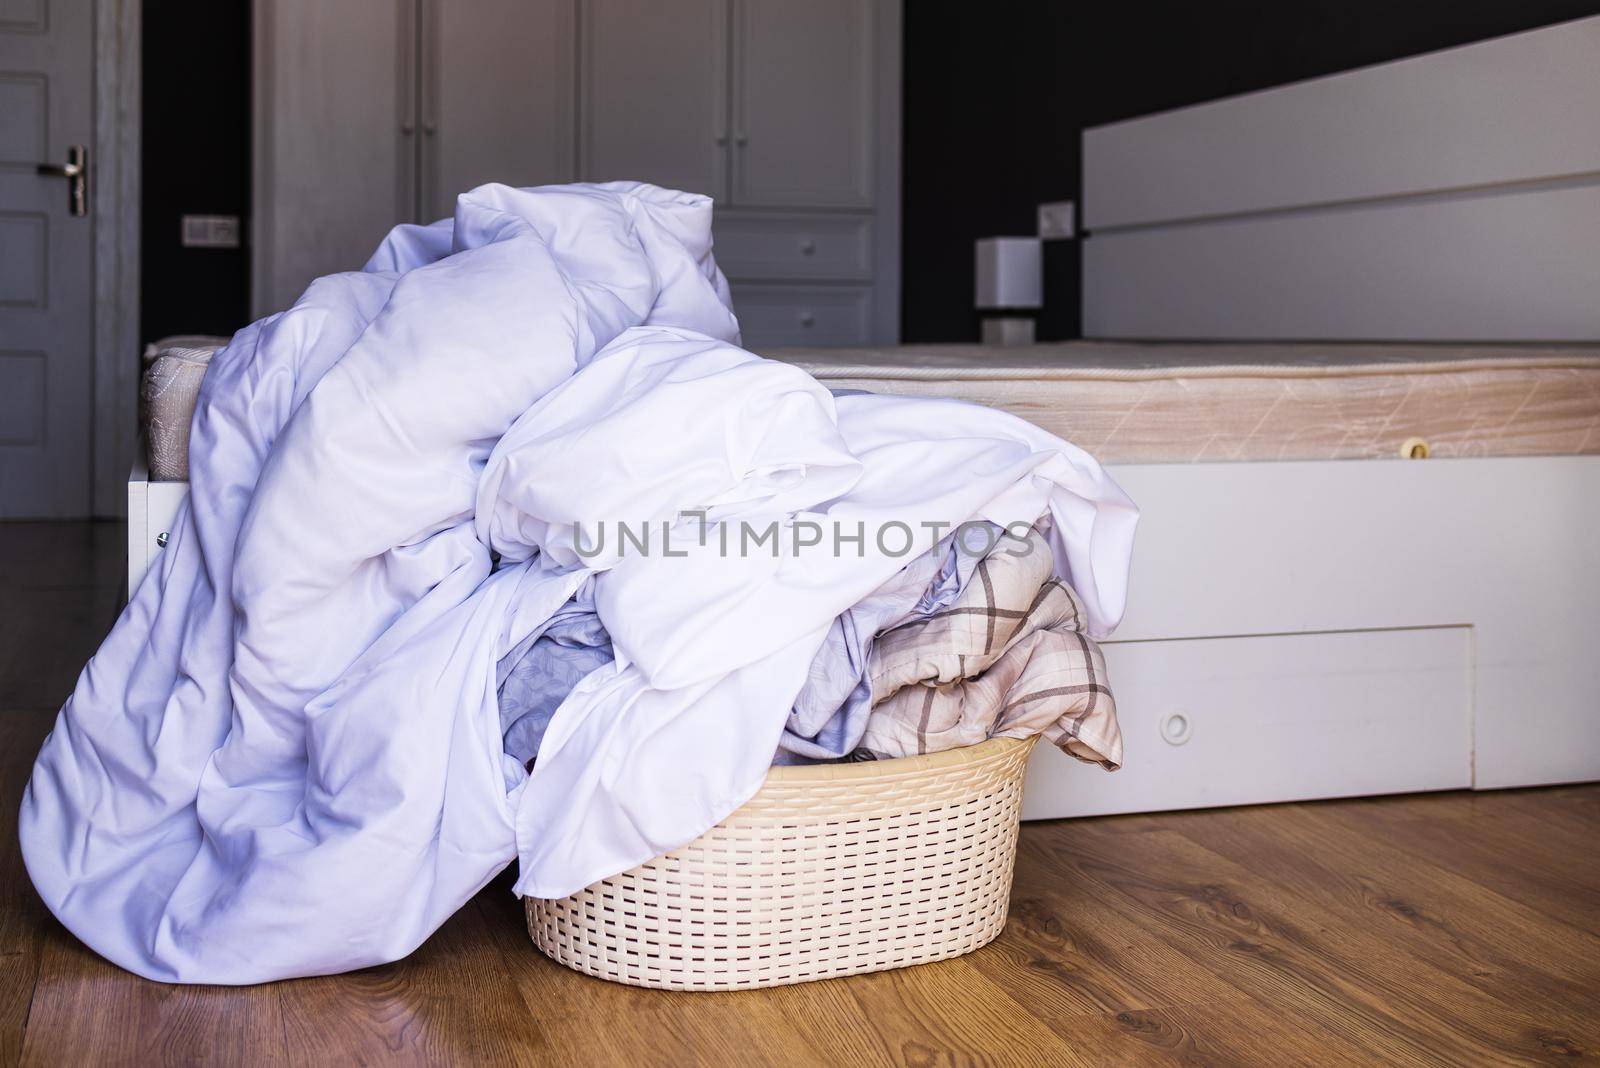 Close-up of a large pile of white bed linen gathered in a basin that stands next to a large bed in a hotel room. Laundry laundry concept, hotel room cleaning service